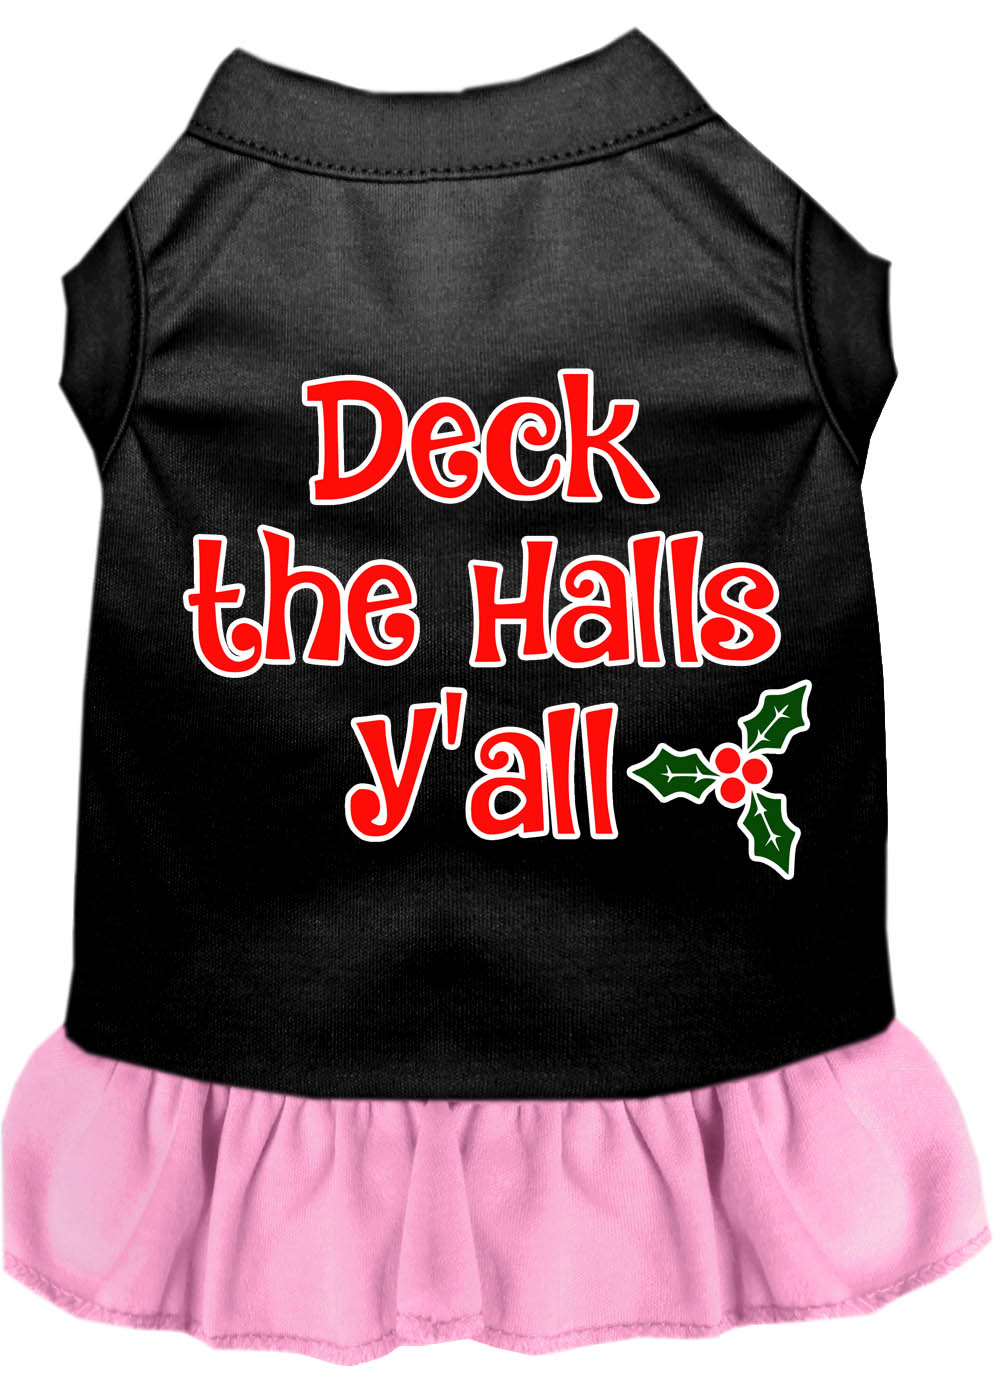 Deck the Halls Y'all Screen Print Dog Dress Black with Light Pink XS